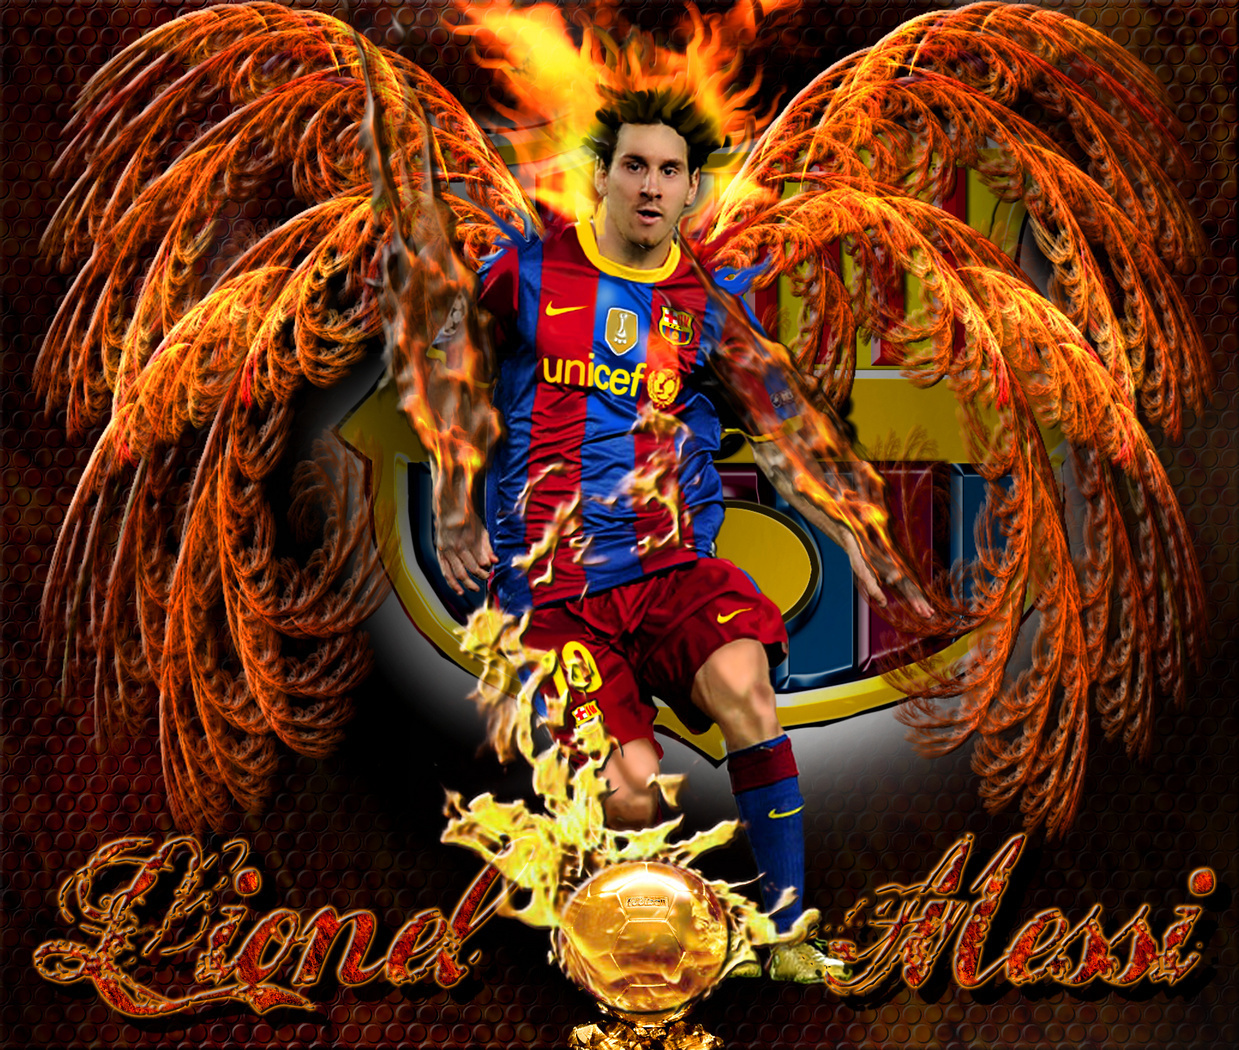 Lionel Messi Fc Barcelona 2013 Hd Wallpapers All About Hd Wallpapers